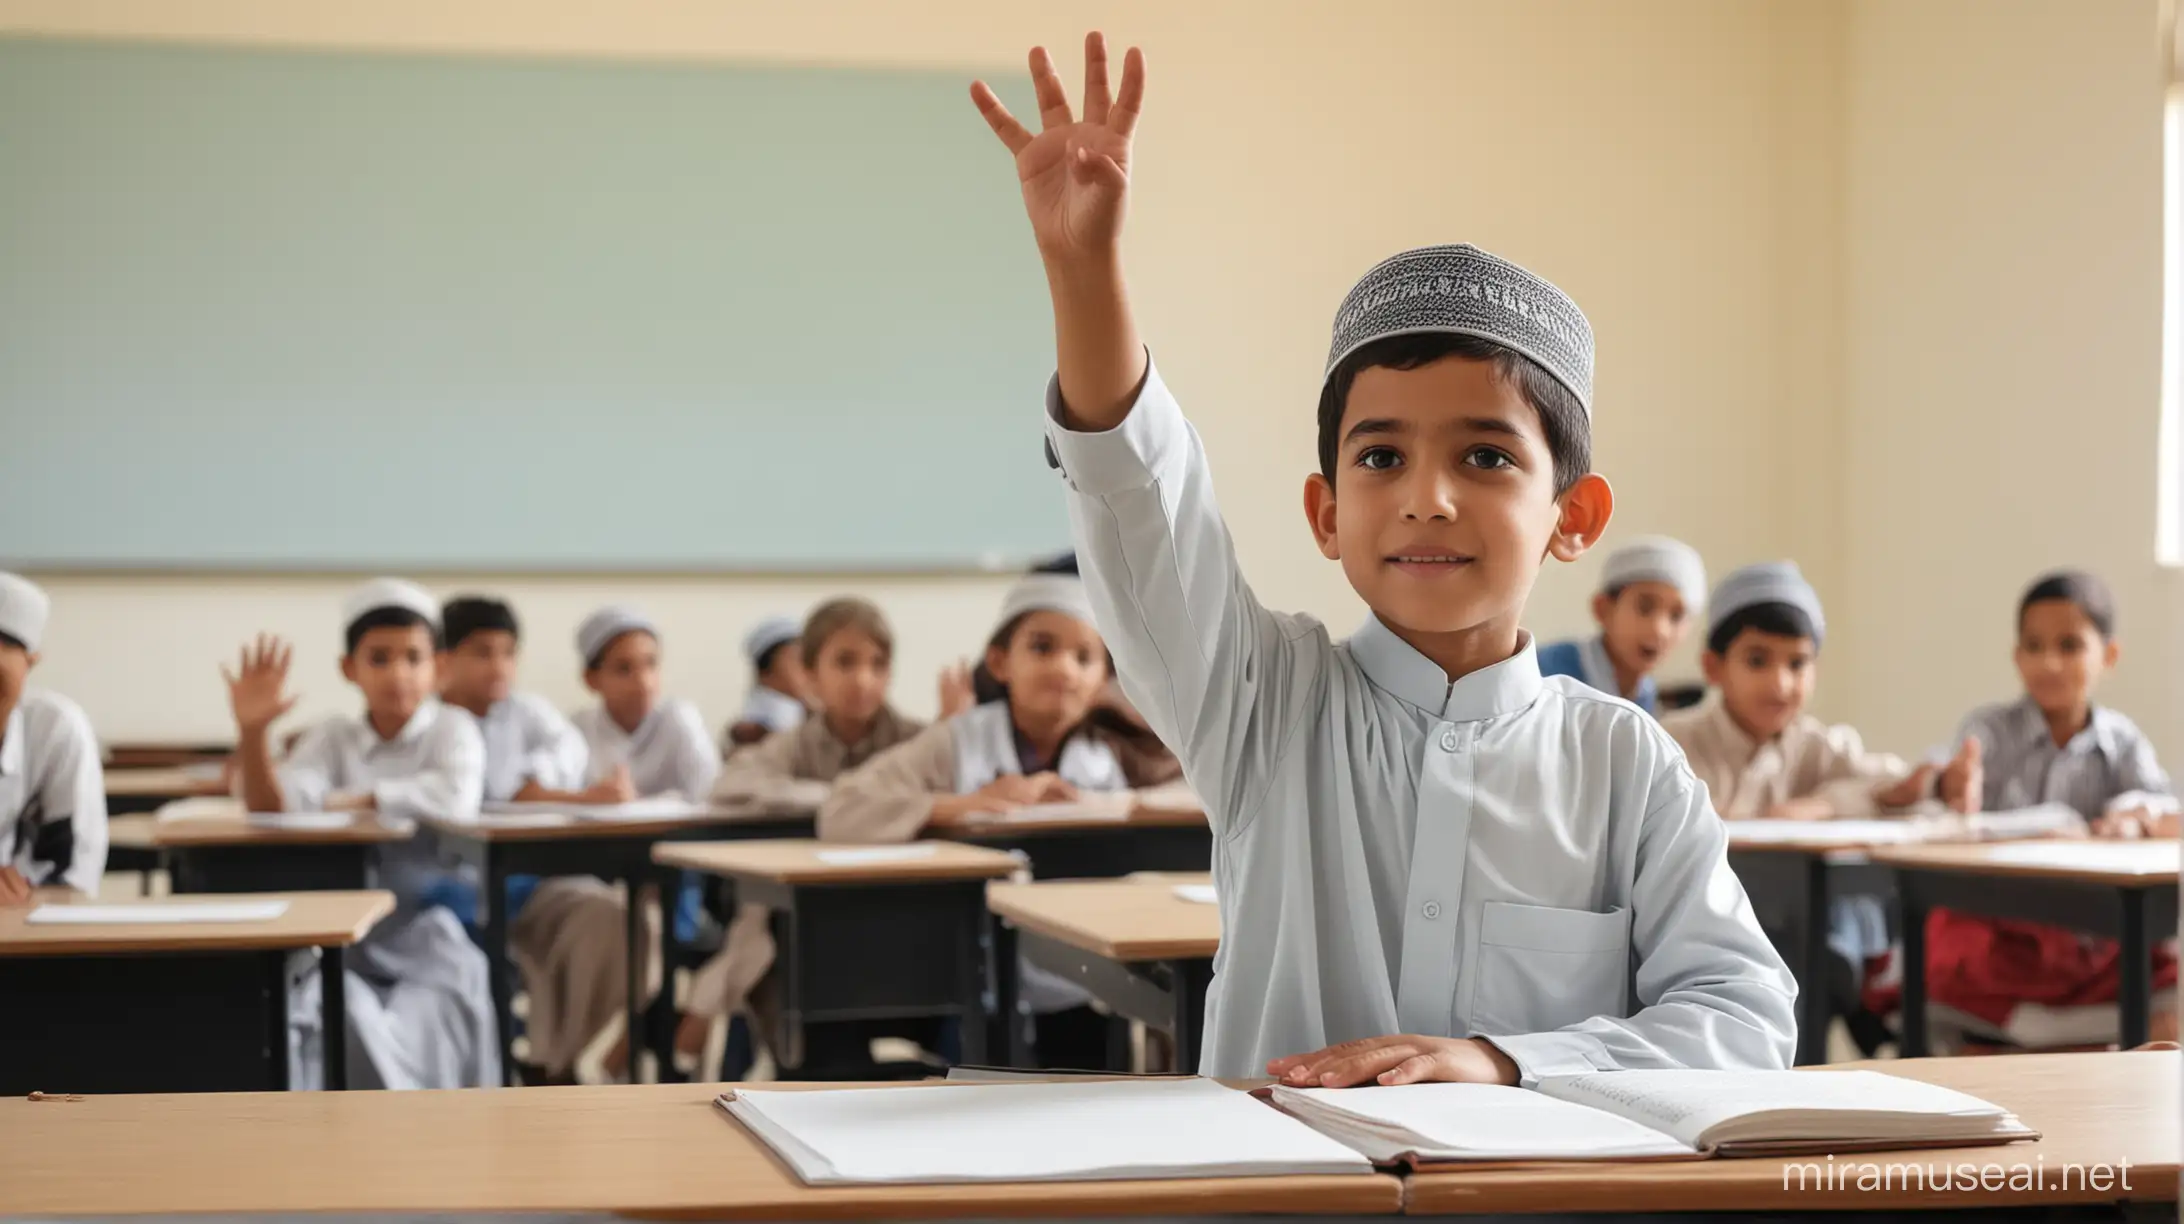 muslim boy raising hand in islamic class room for answer the question of teacher 